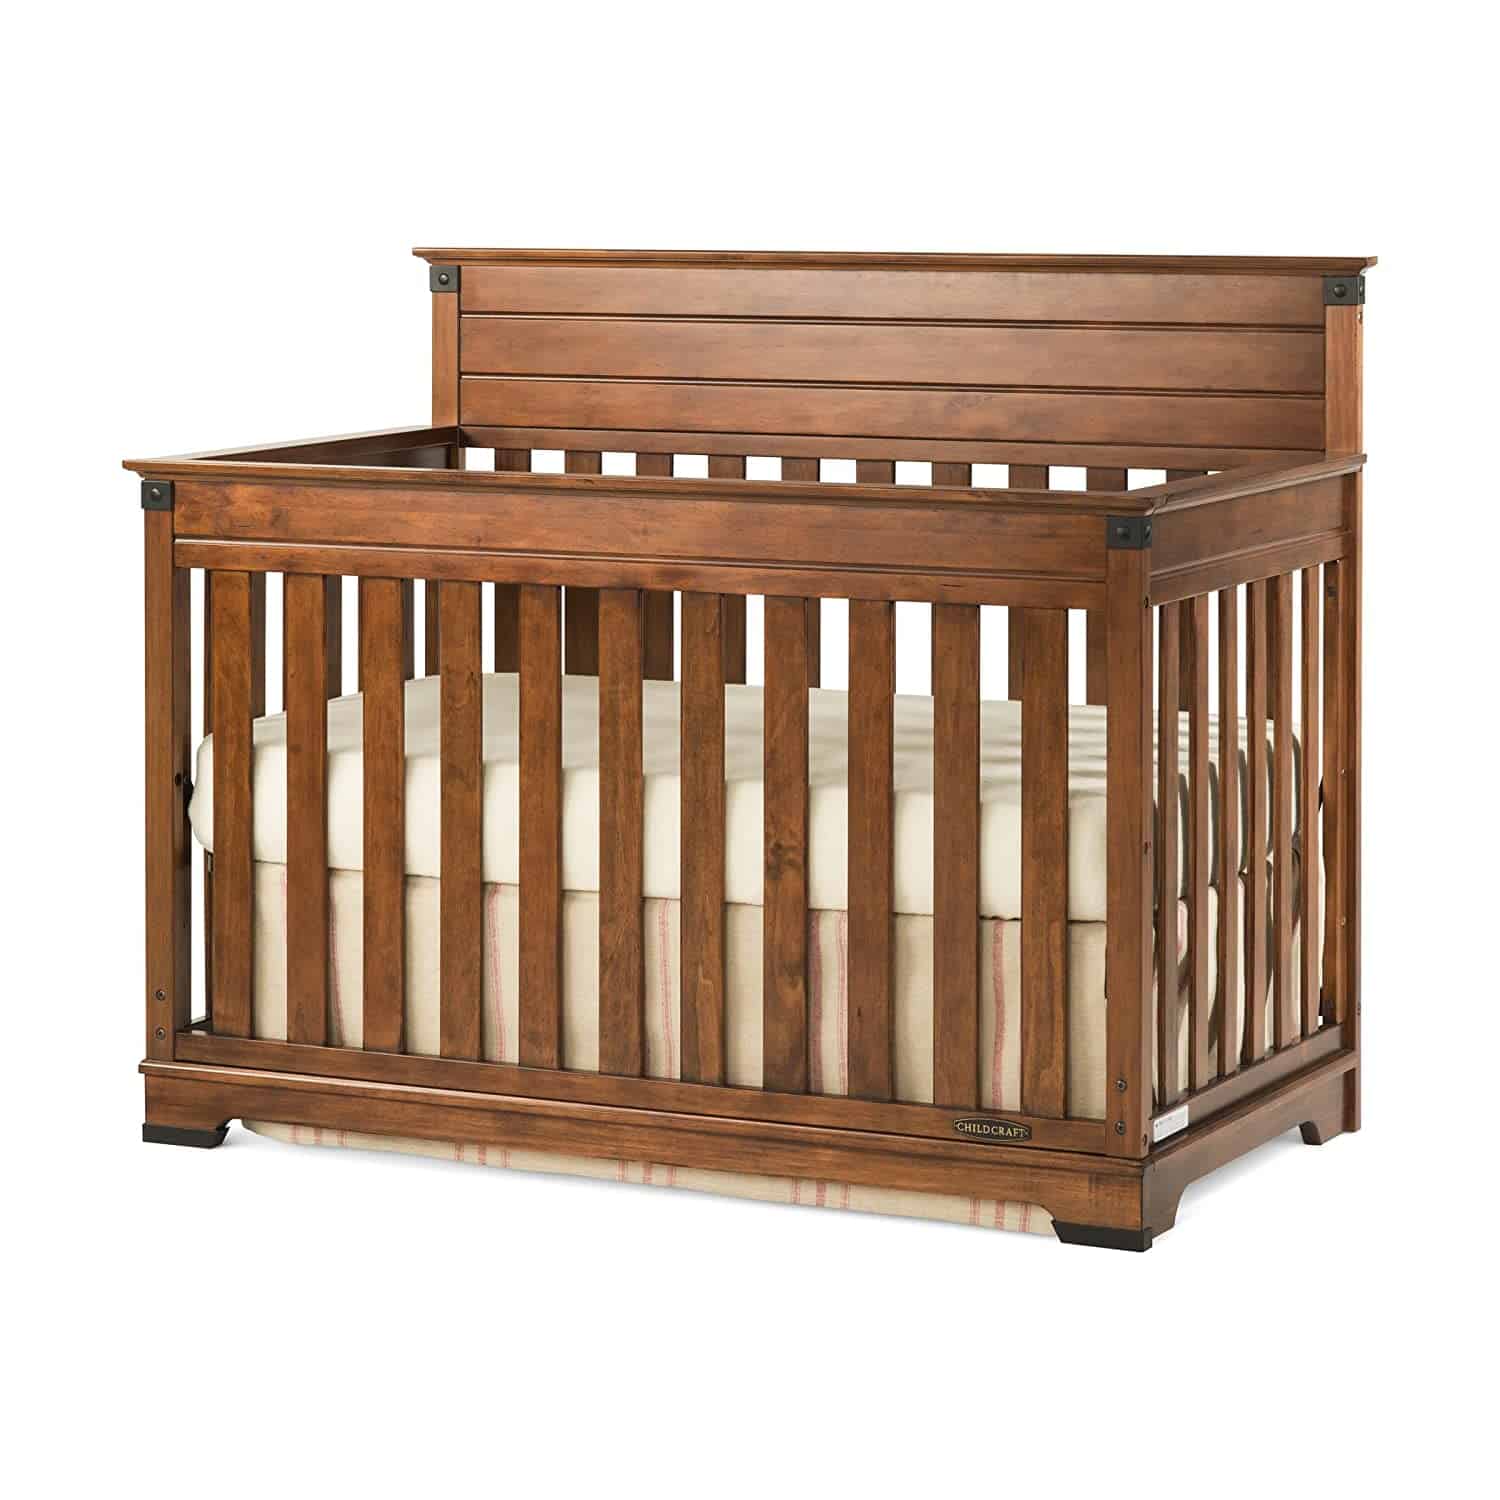 Are Child Craft Cribs Safe